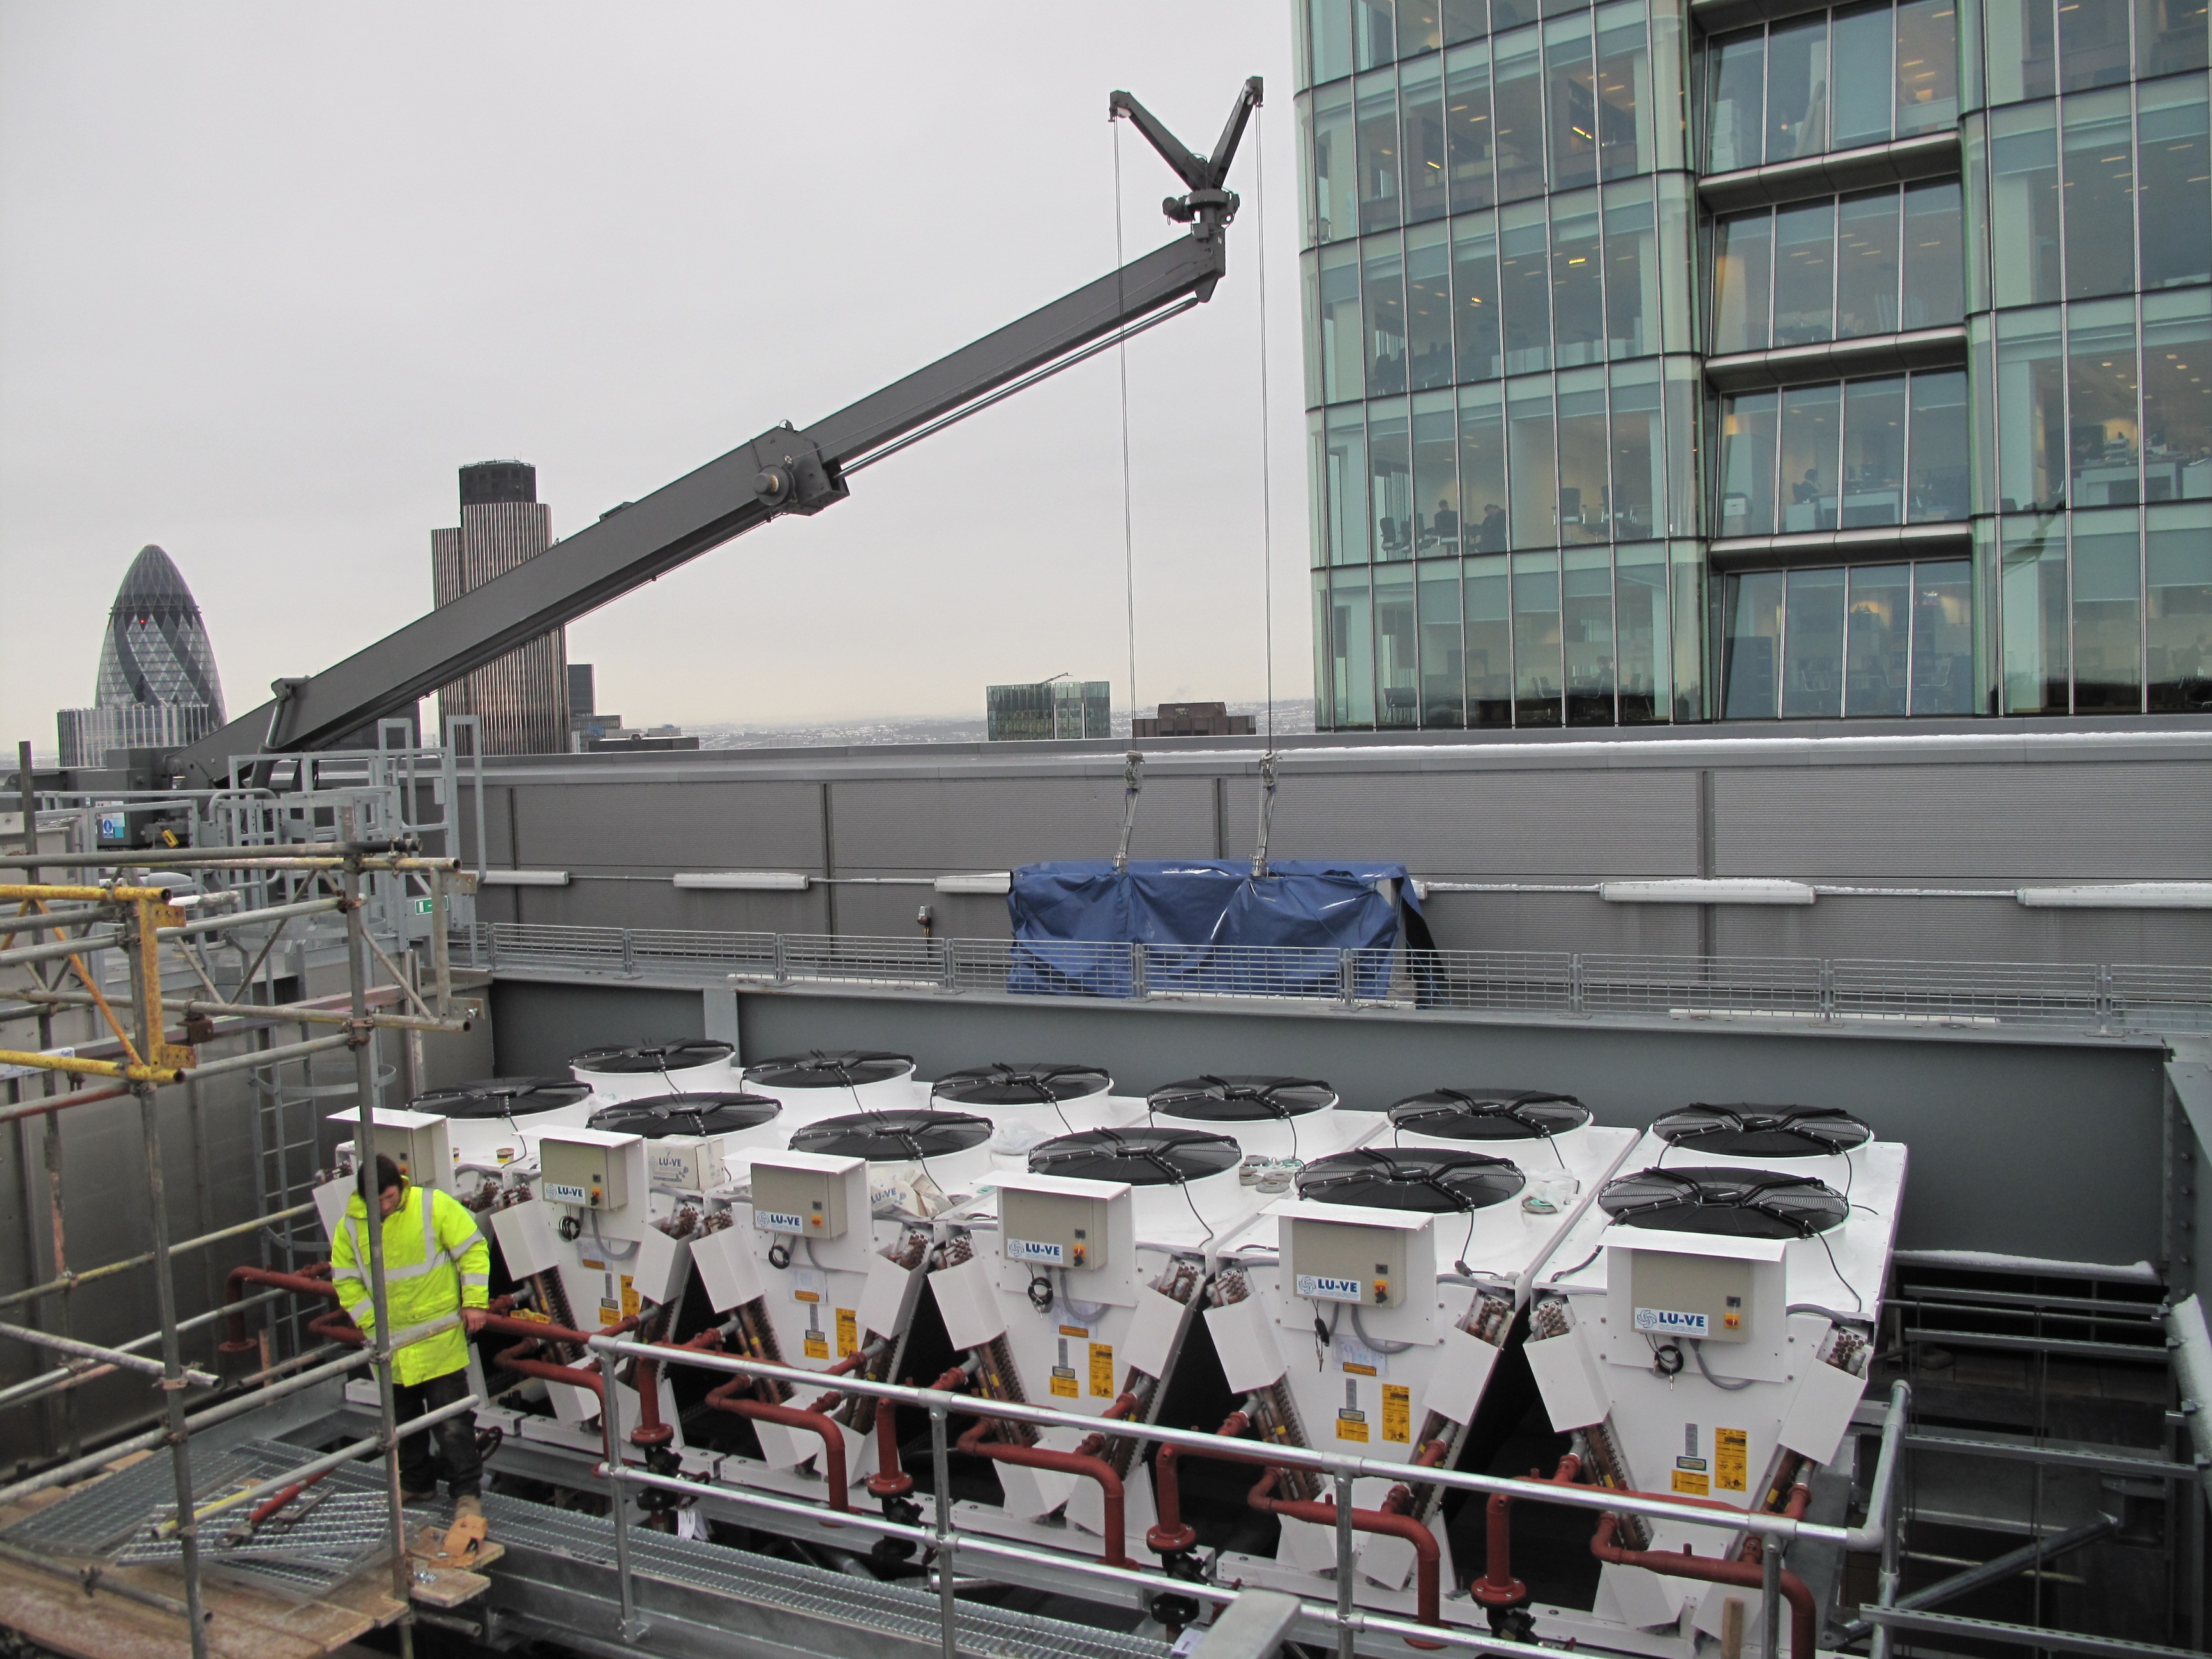 Data Process Centre Installation, City of London,  UK -  
14 units: 6  XDHV  air cooled condensers spec. with electronic motors – 8 XDHL dry coolers spec. with electronic motors
